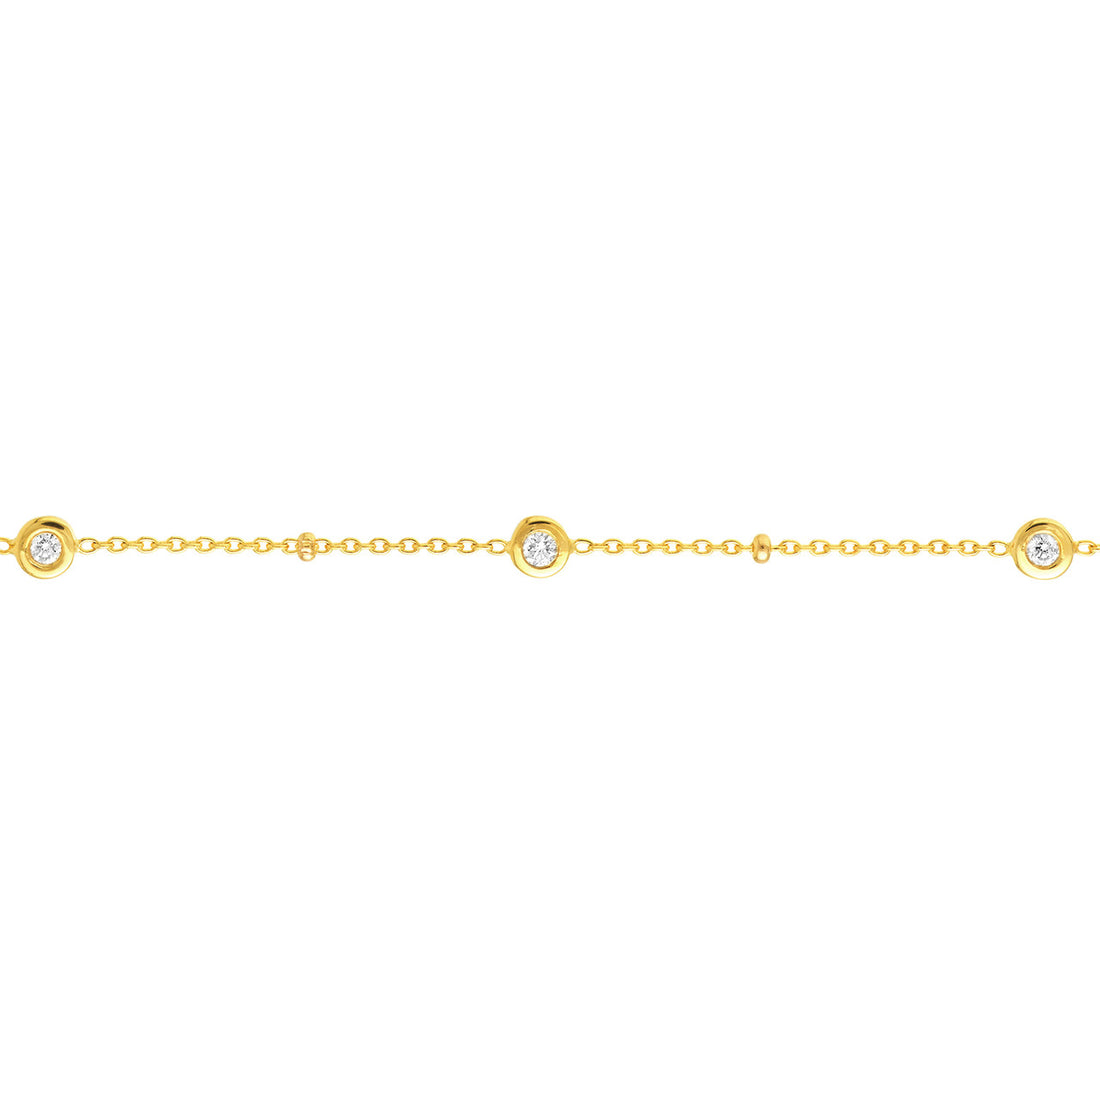 diamond bezels and beads bracelet in yellow gold